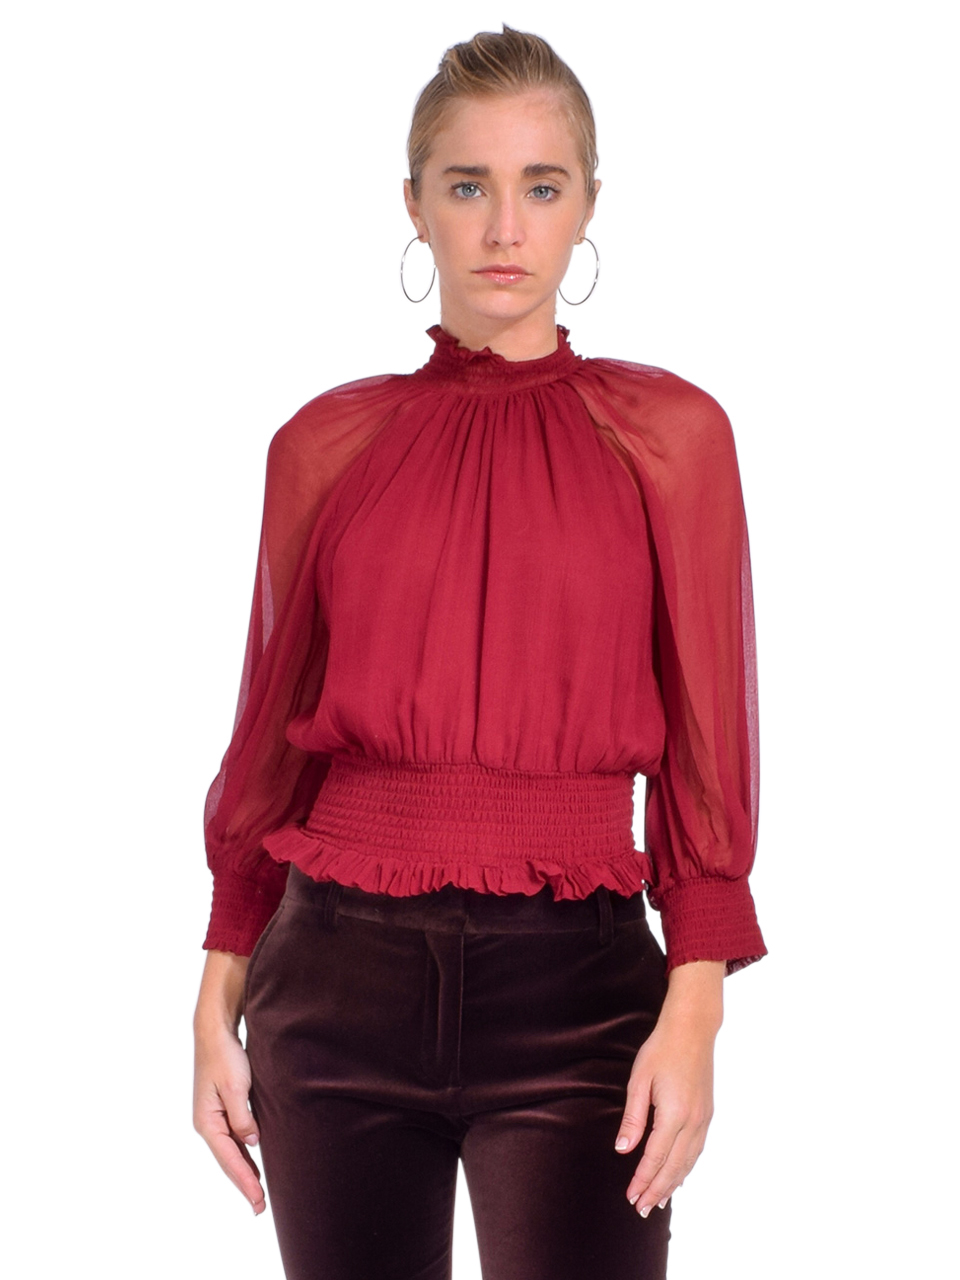 GILNER FARRAR Dell Blouse in Ruby Red Front View 